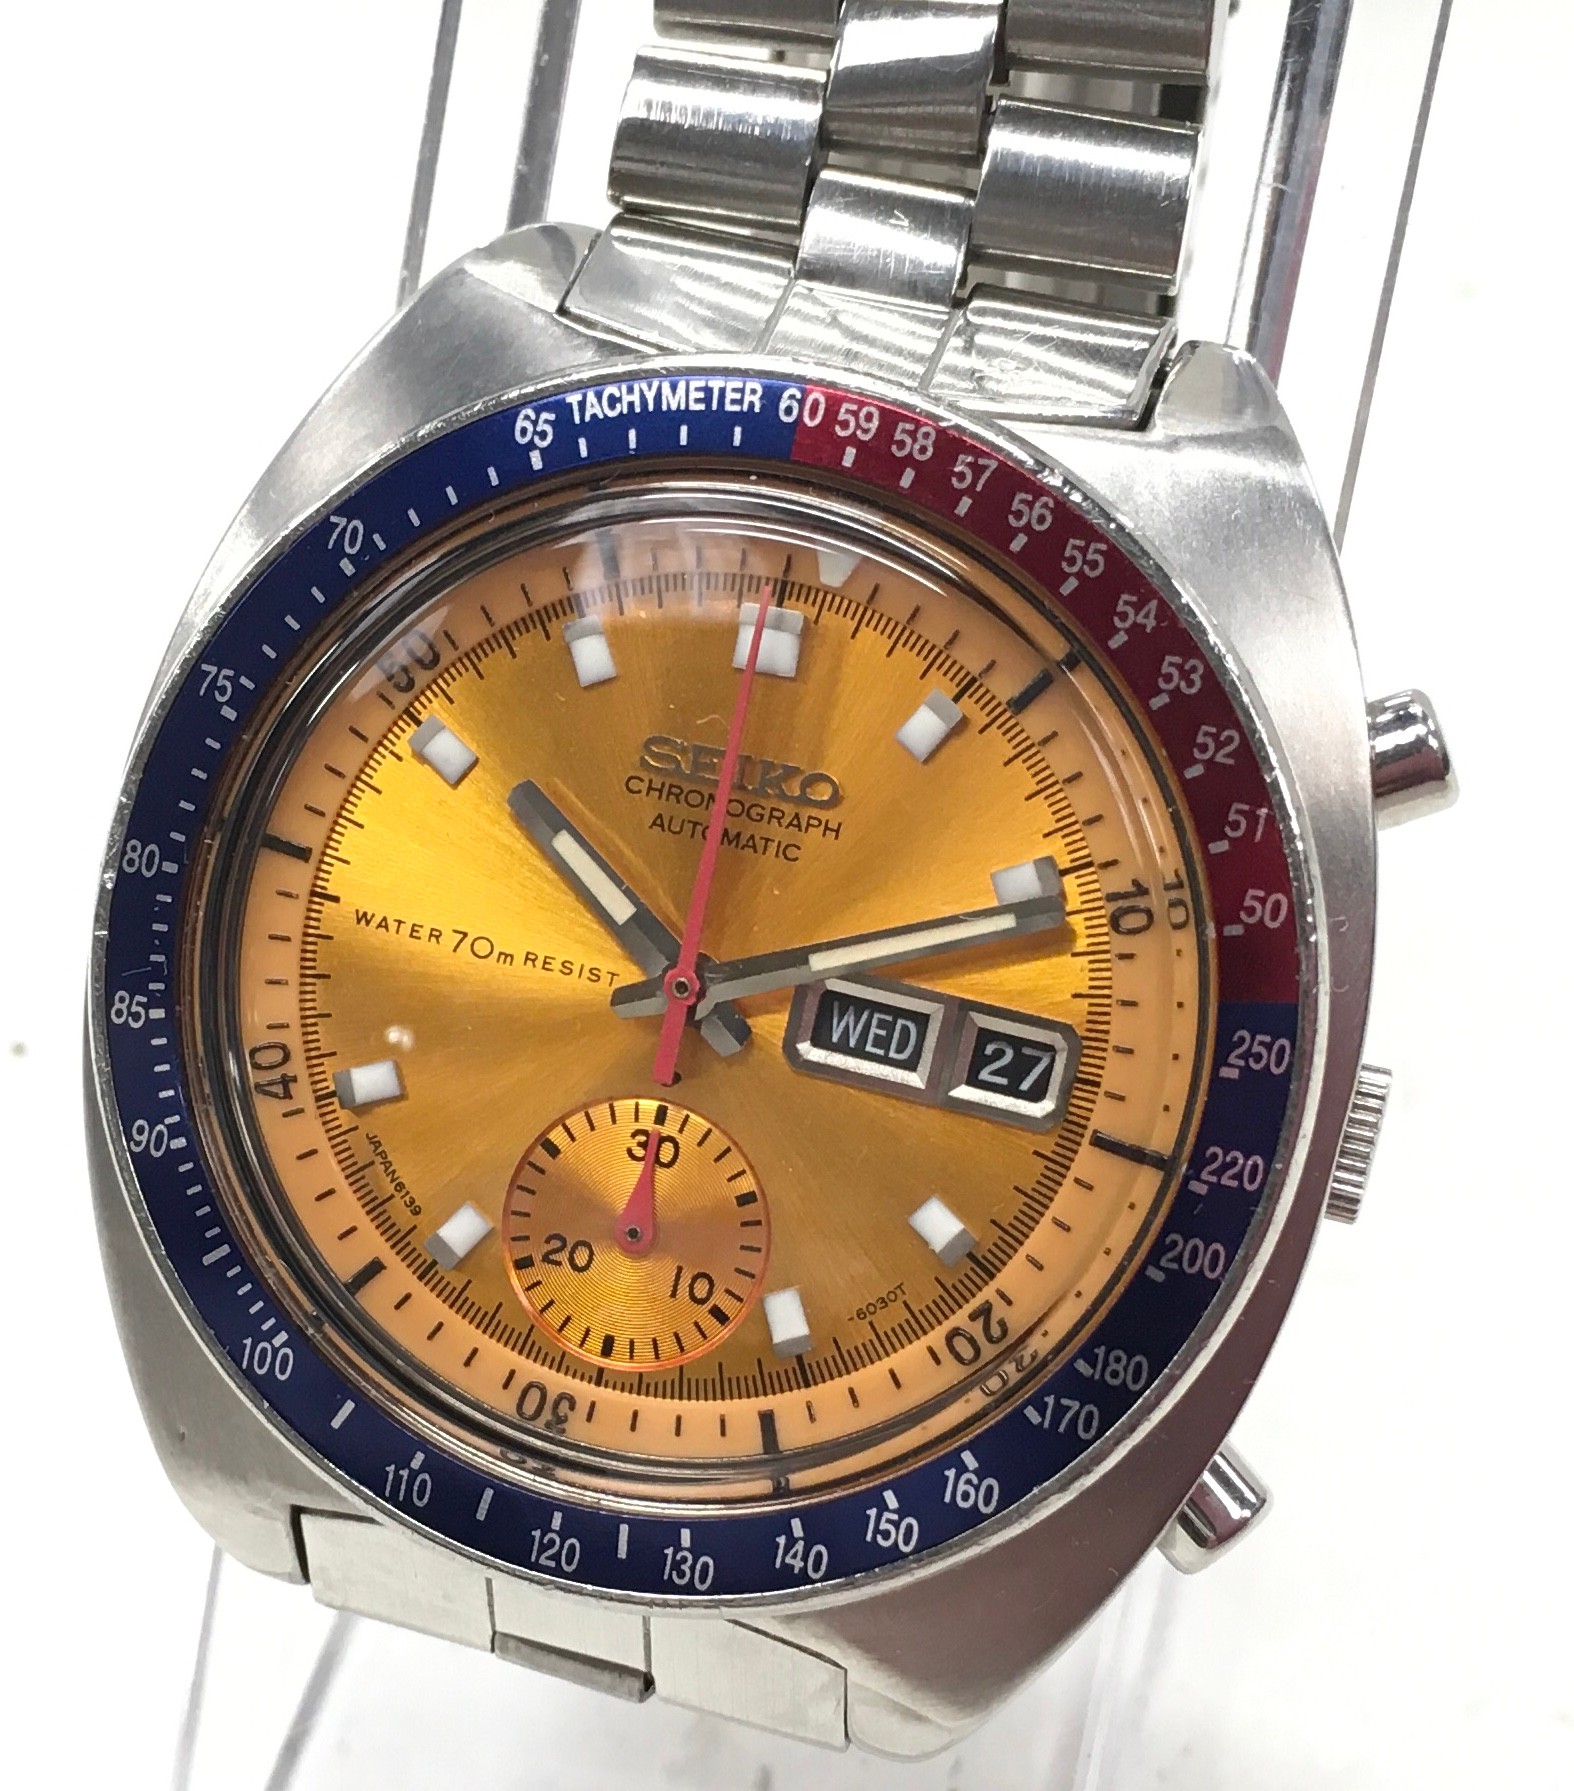 Collectible Seiko 6139-6002 'Pogue' automatic chronograph. Fully working,  chronograph resets to zero